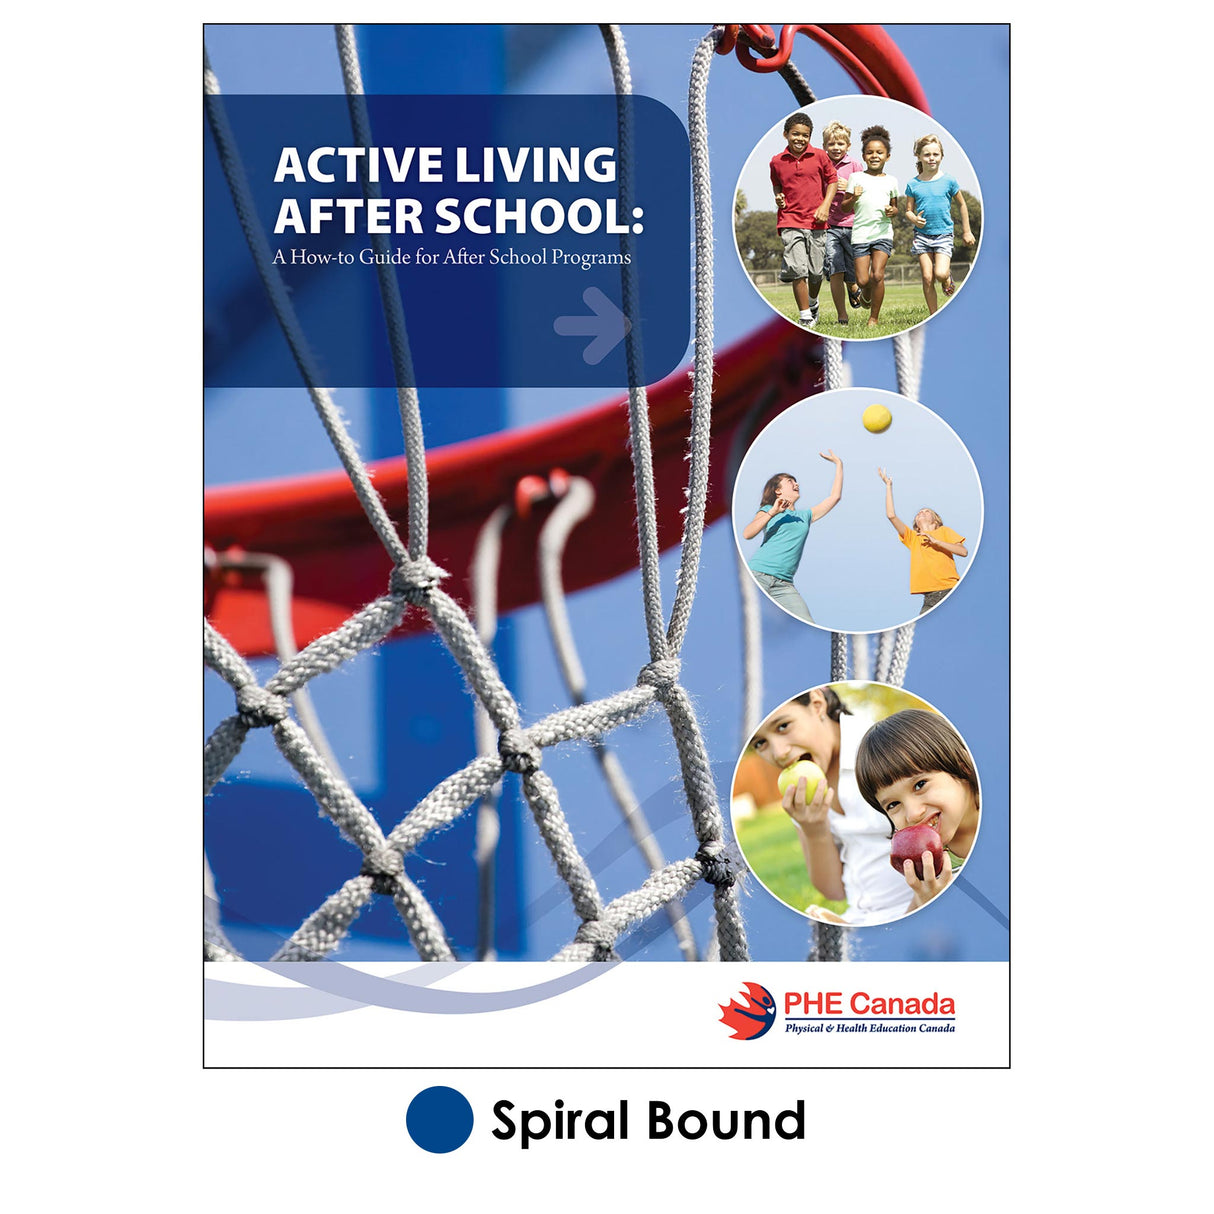 Active Living After School: A How-to Guide for After School Programs